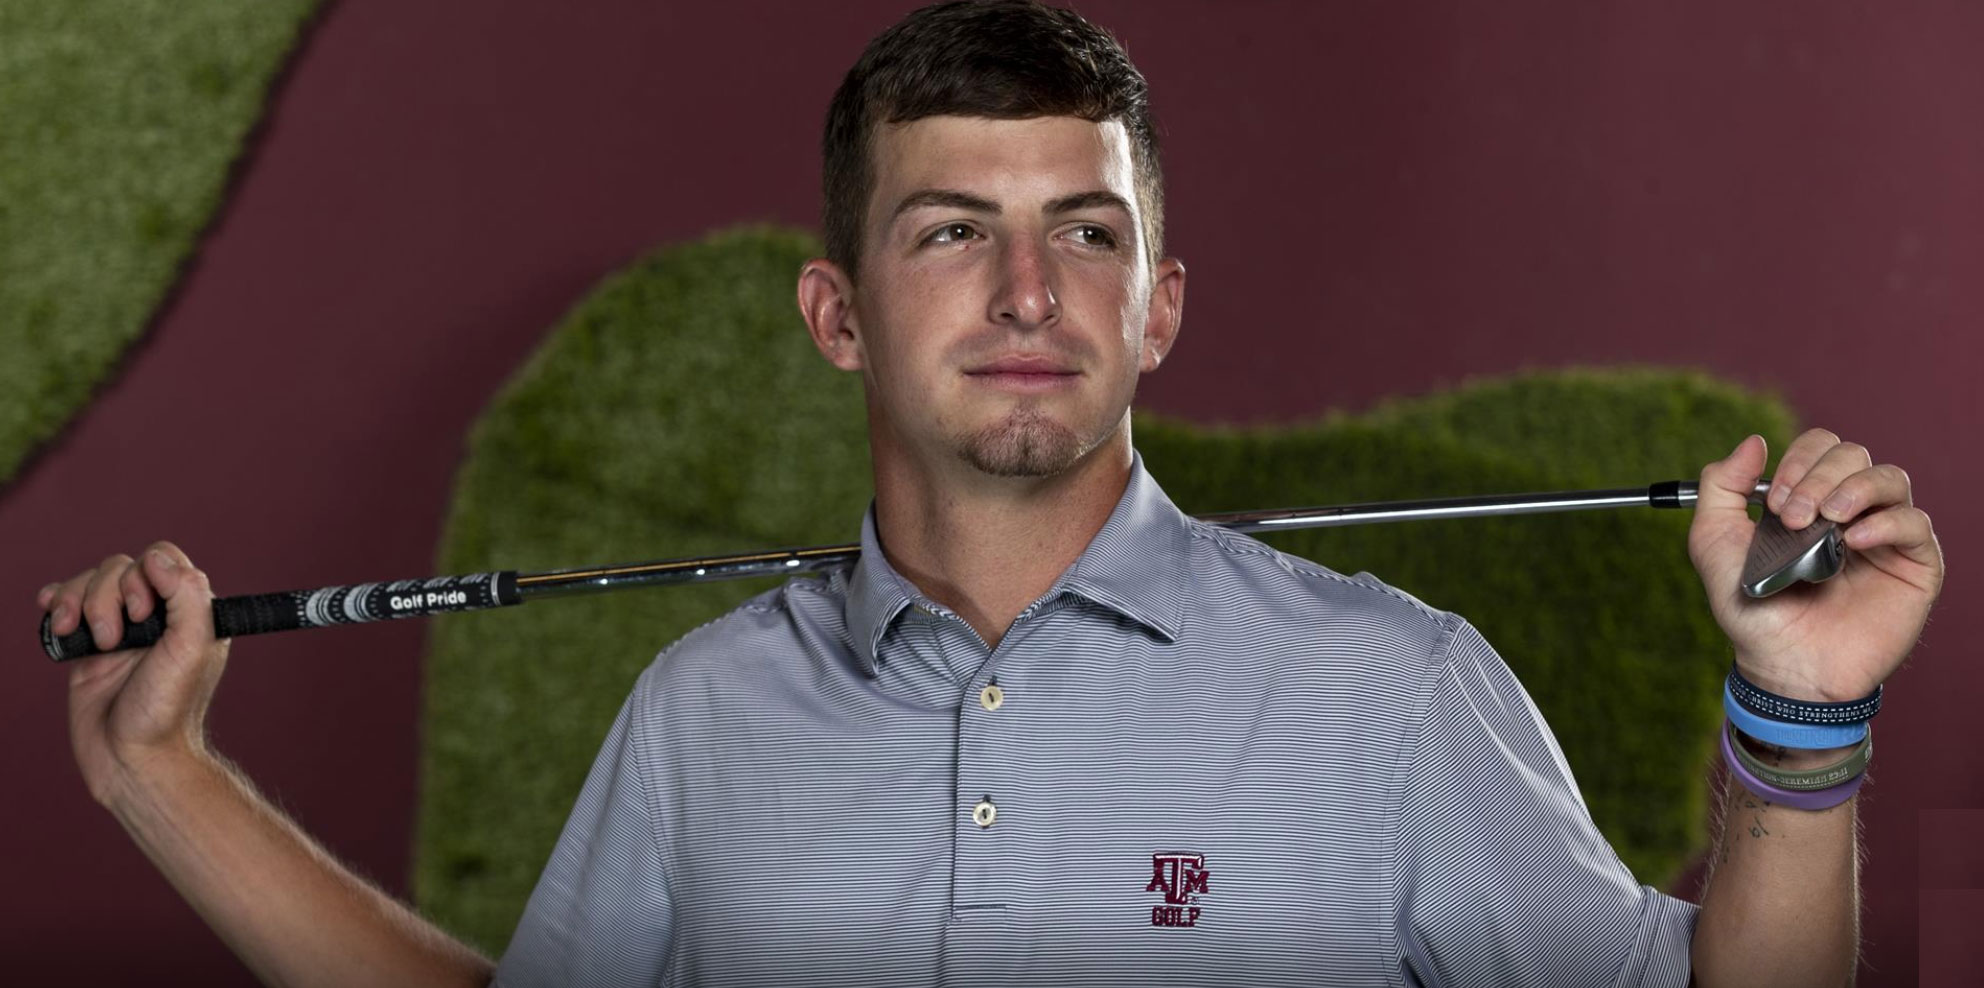 Inspired by loss, Sam college golf’s top senior, is playing